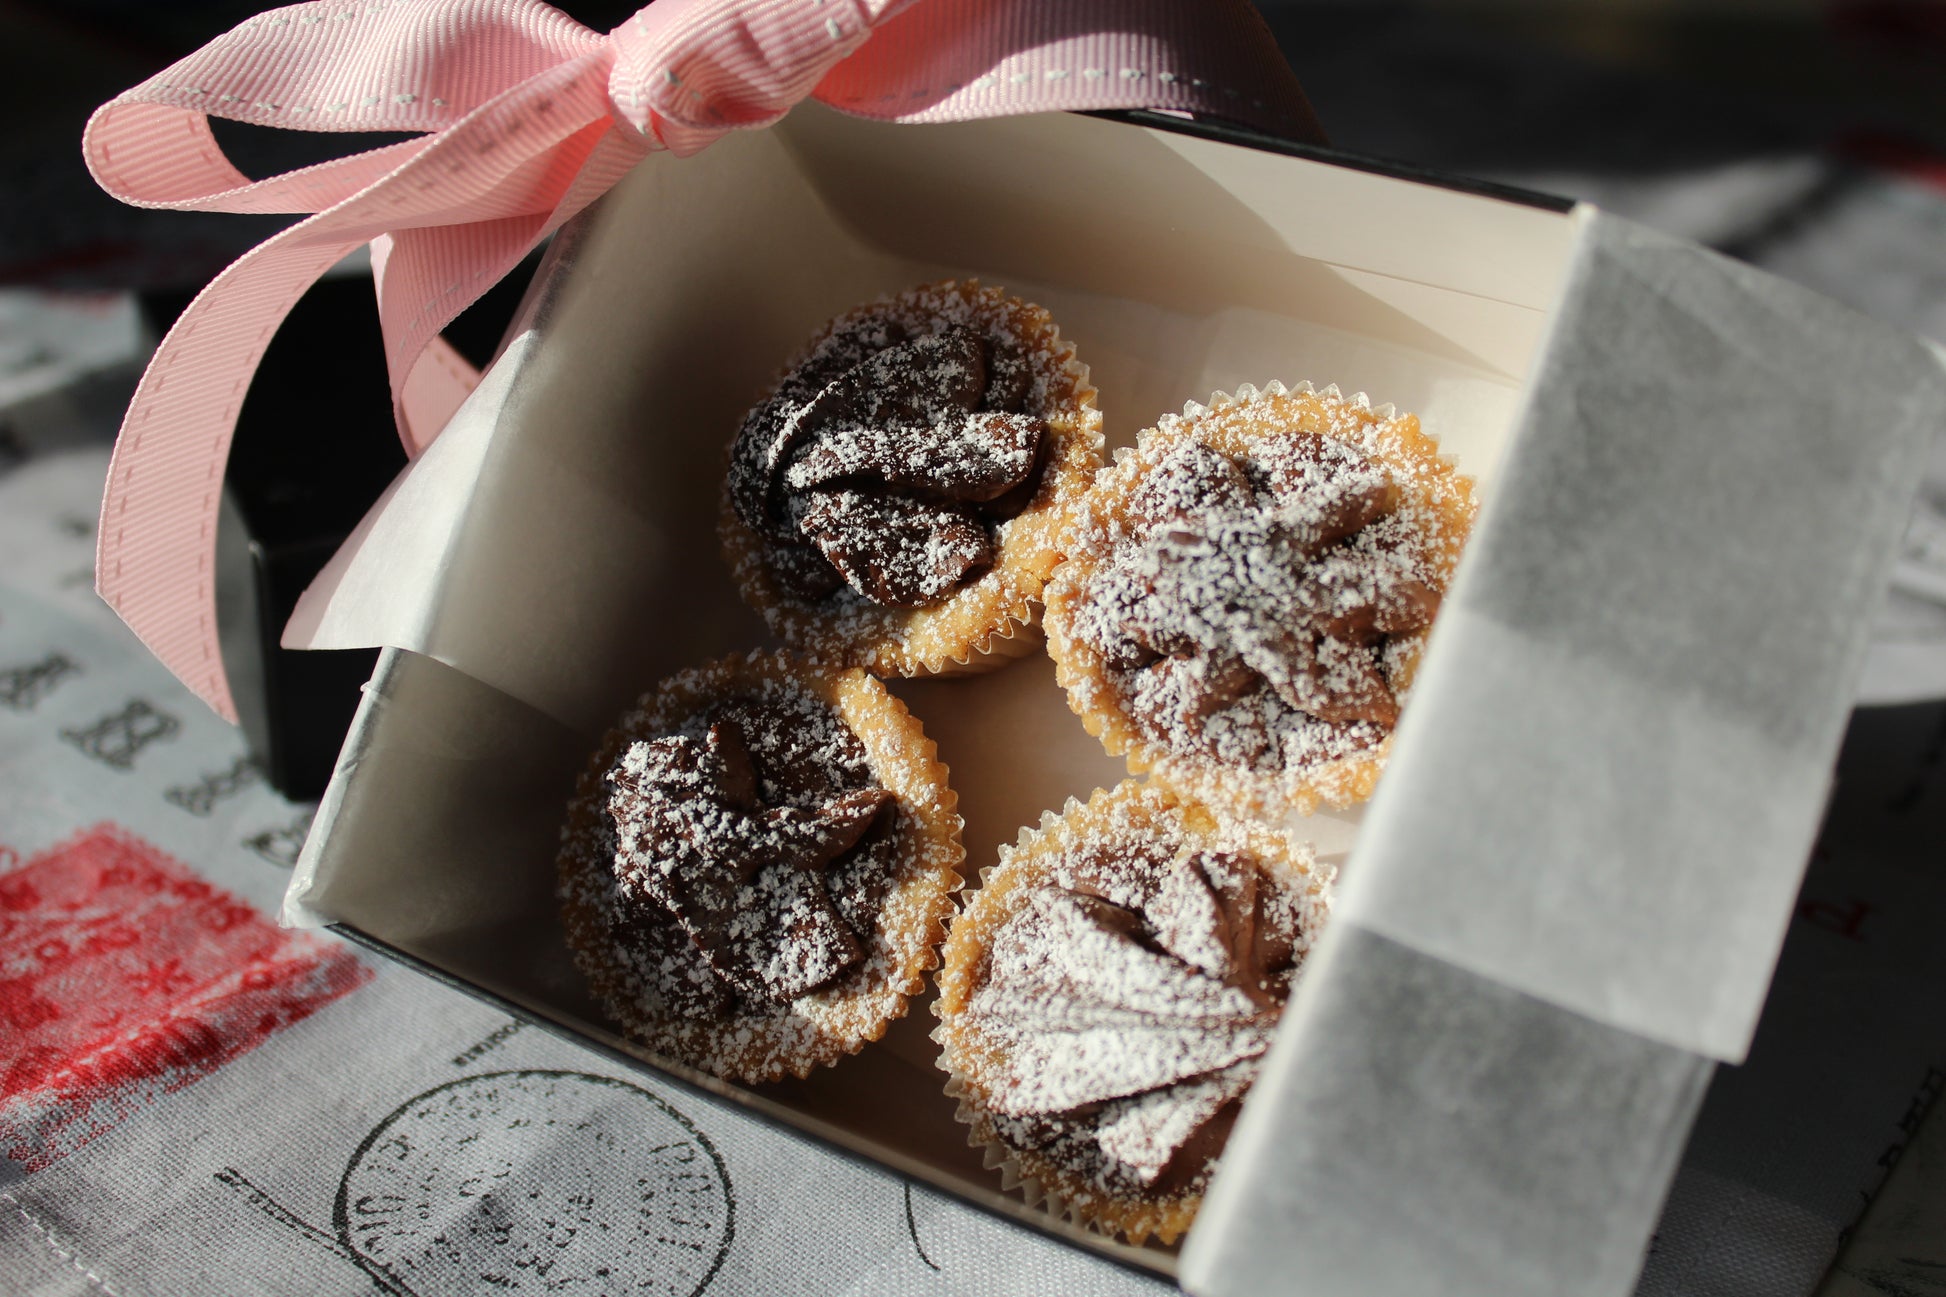 Chocolate Gluten Free Pastry Minis - 4 Piece Gift Box - softly textured buttery gluten free dough surrounding a dollop of chocolate ganache filling